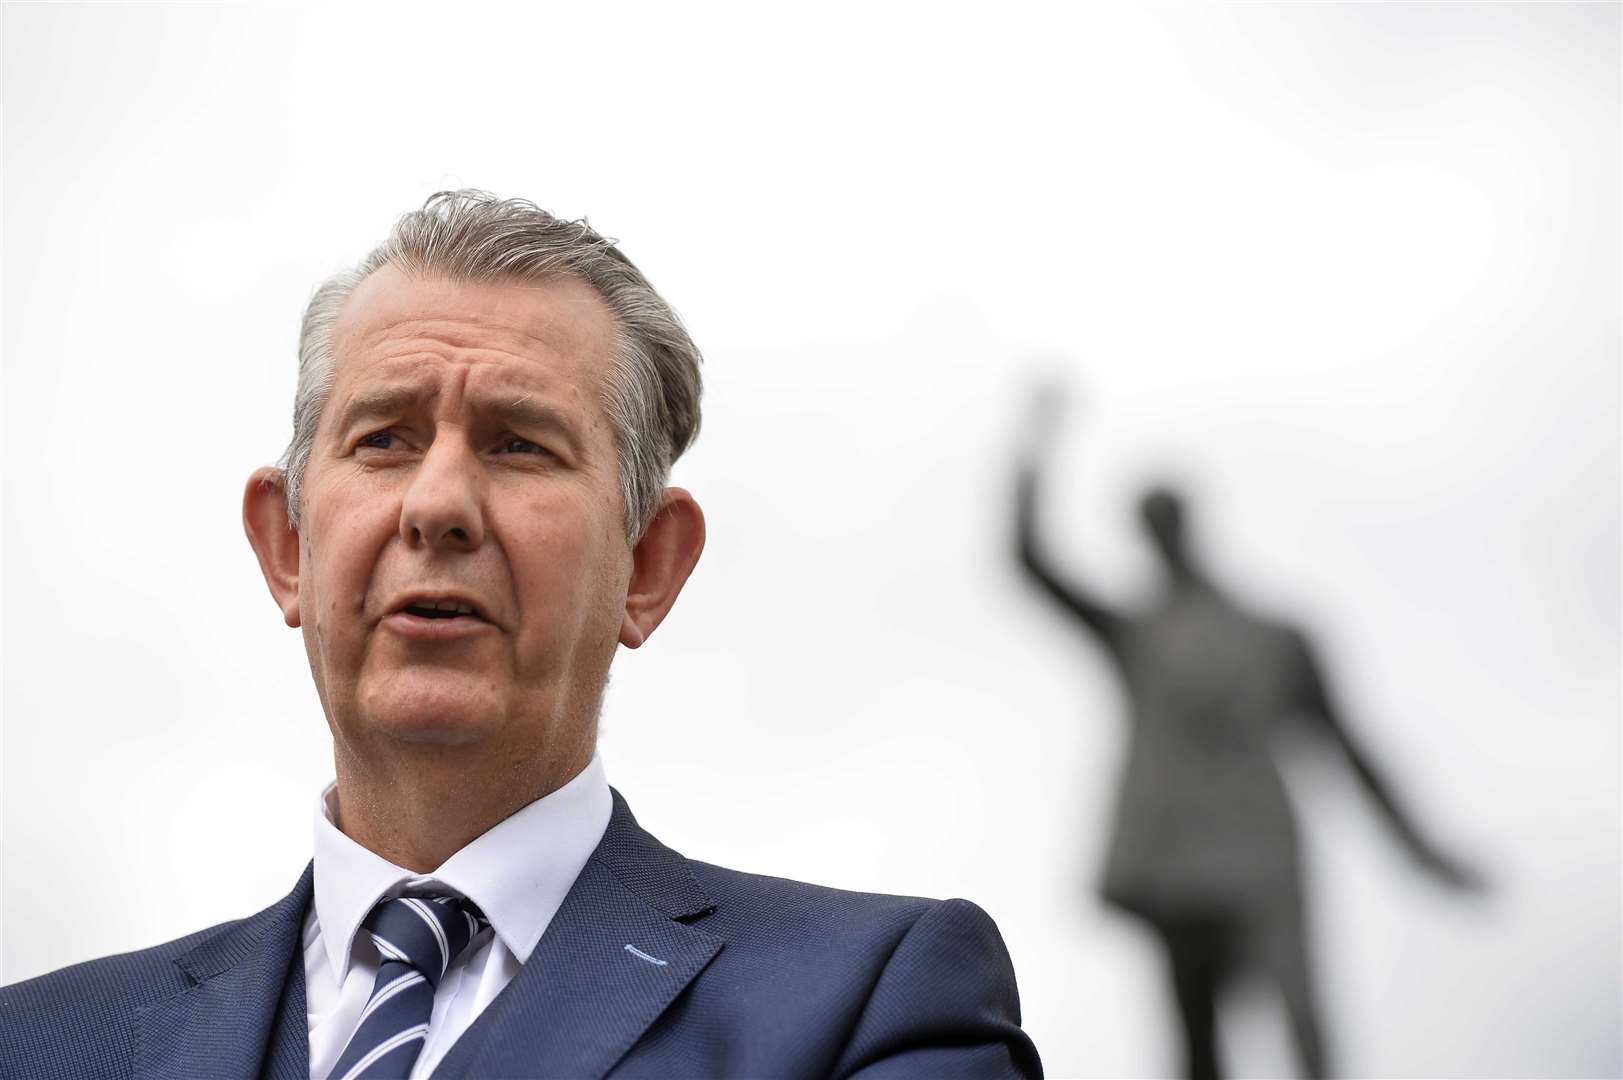 DUP Leader Edwin Poots said he wants to move forward from the row over Ian Paisley’s criticism of Robin Swann (Mark Marlow/PA)